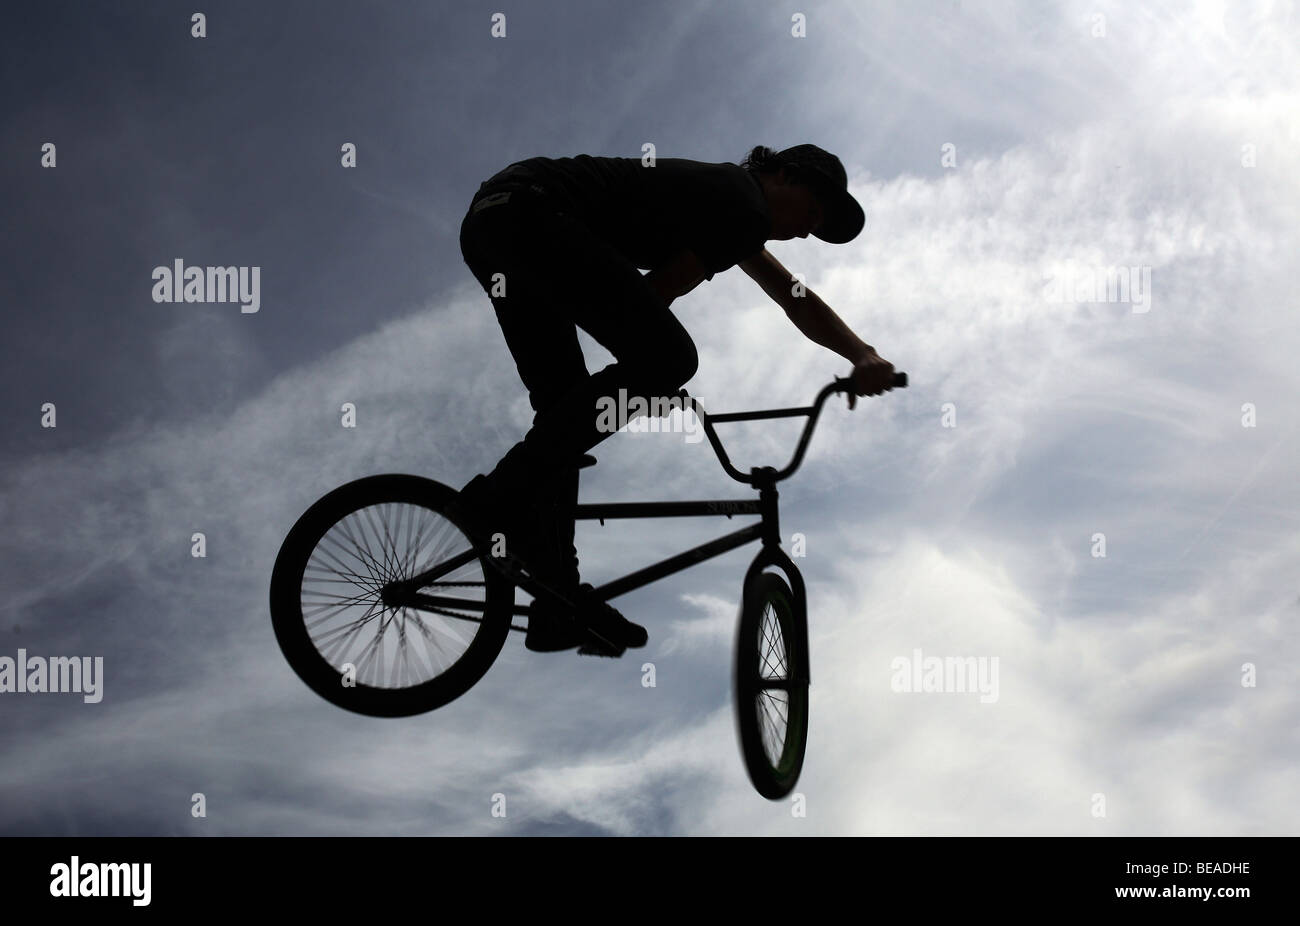 A biker jumping up in the air, Leipzig, Germany Stock Photo